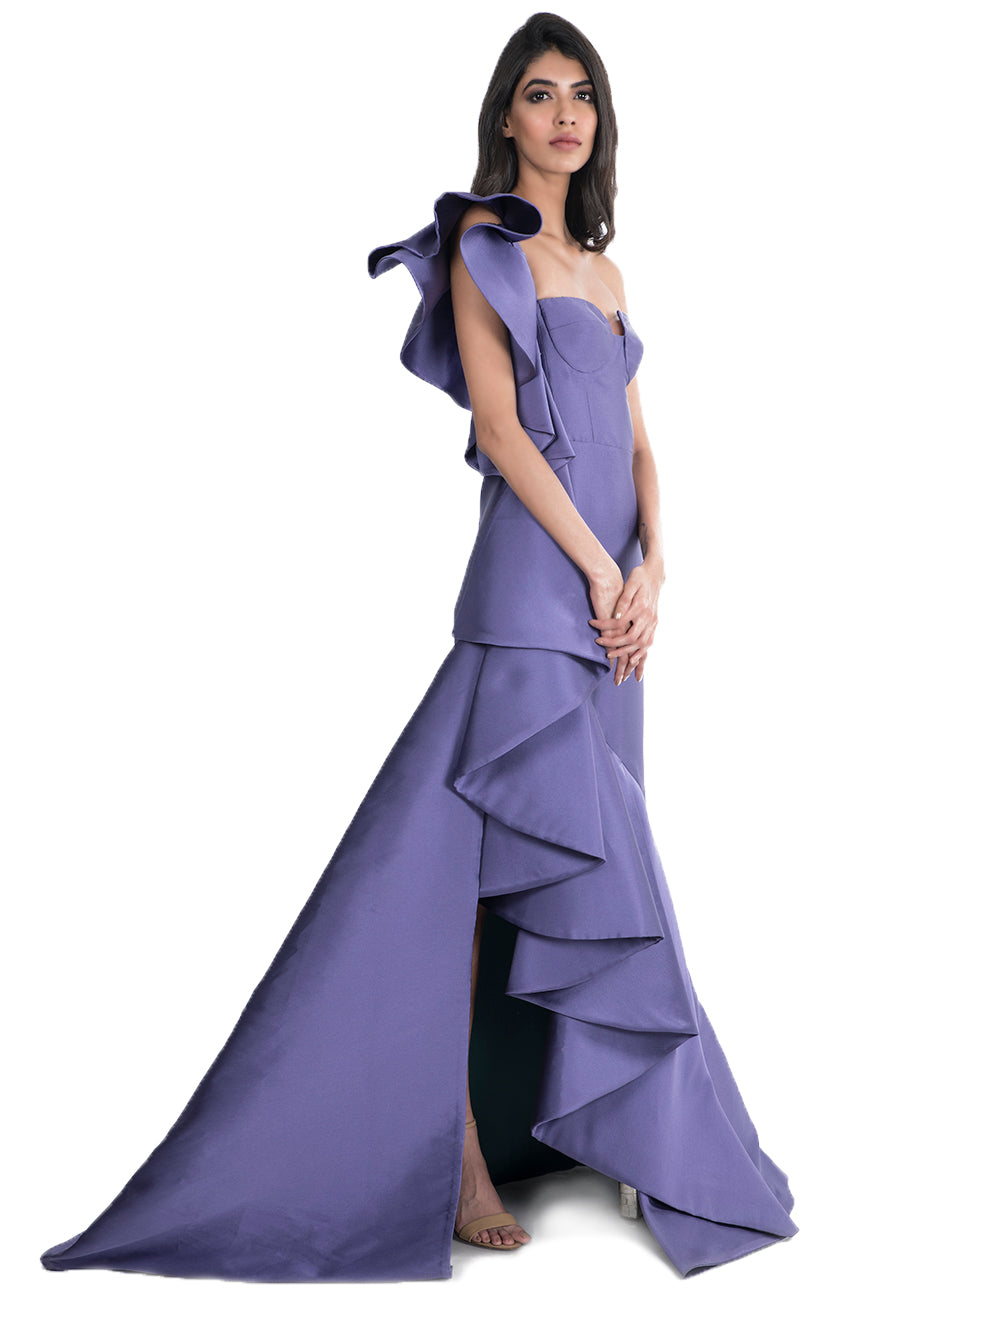 Ultraviolet Gown